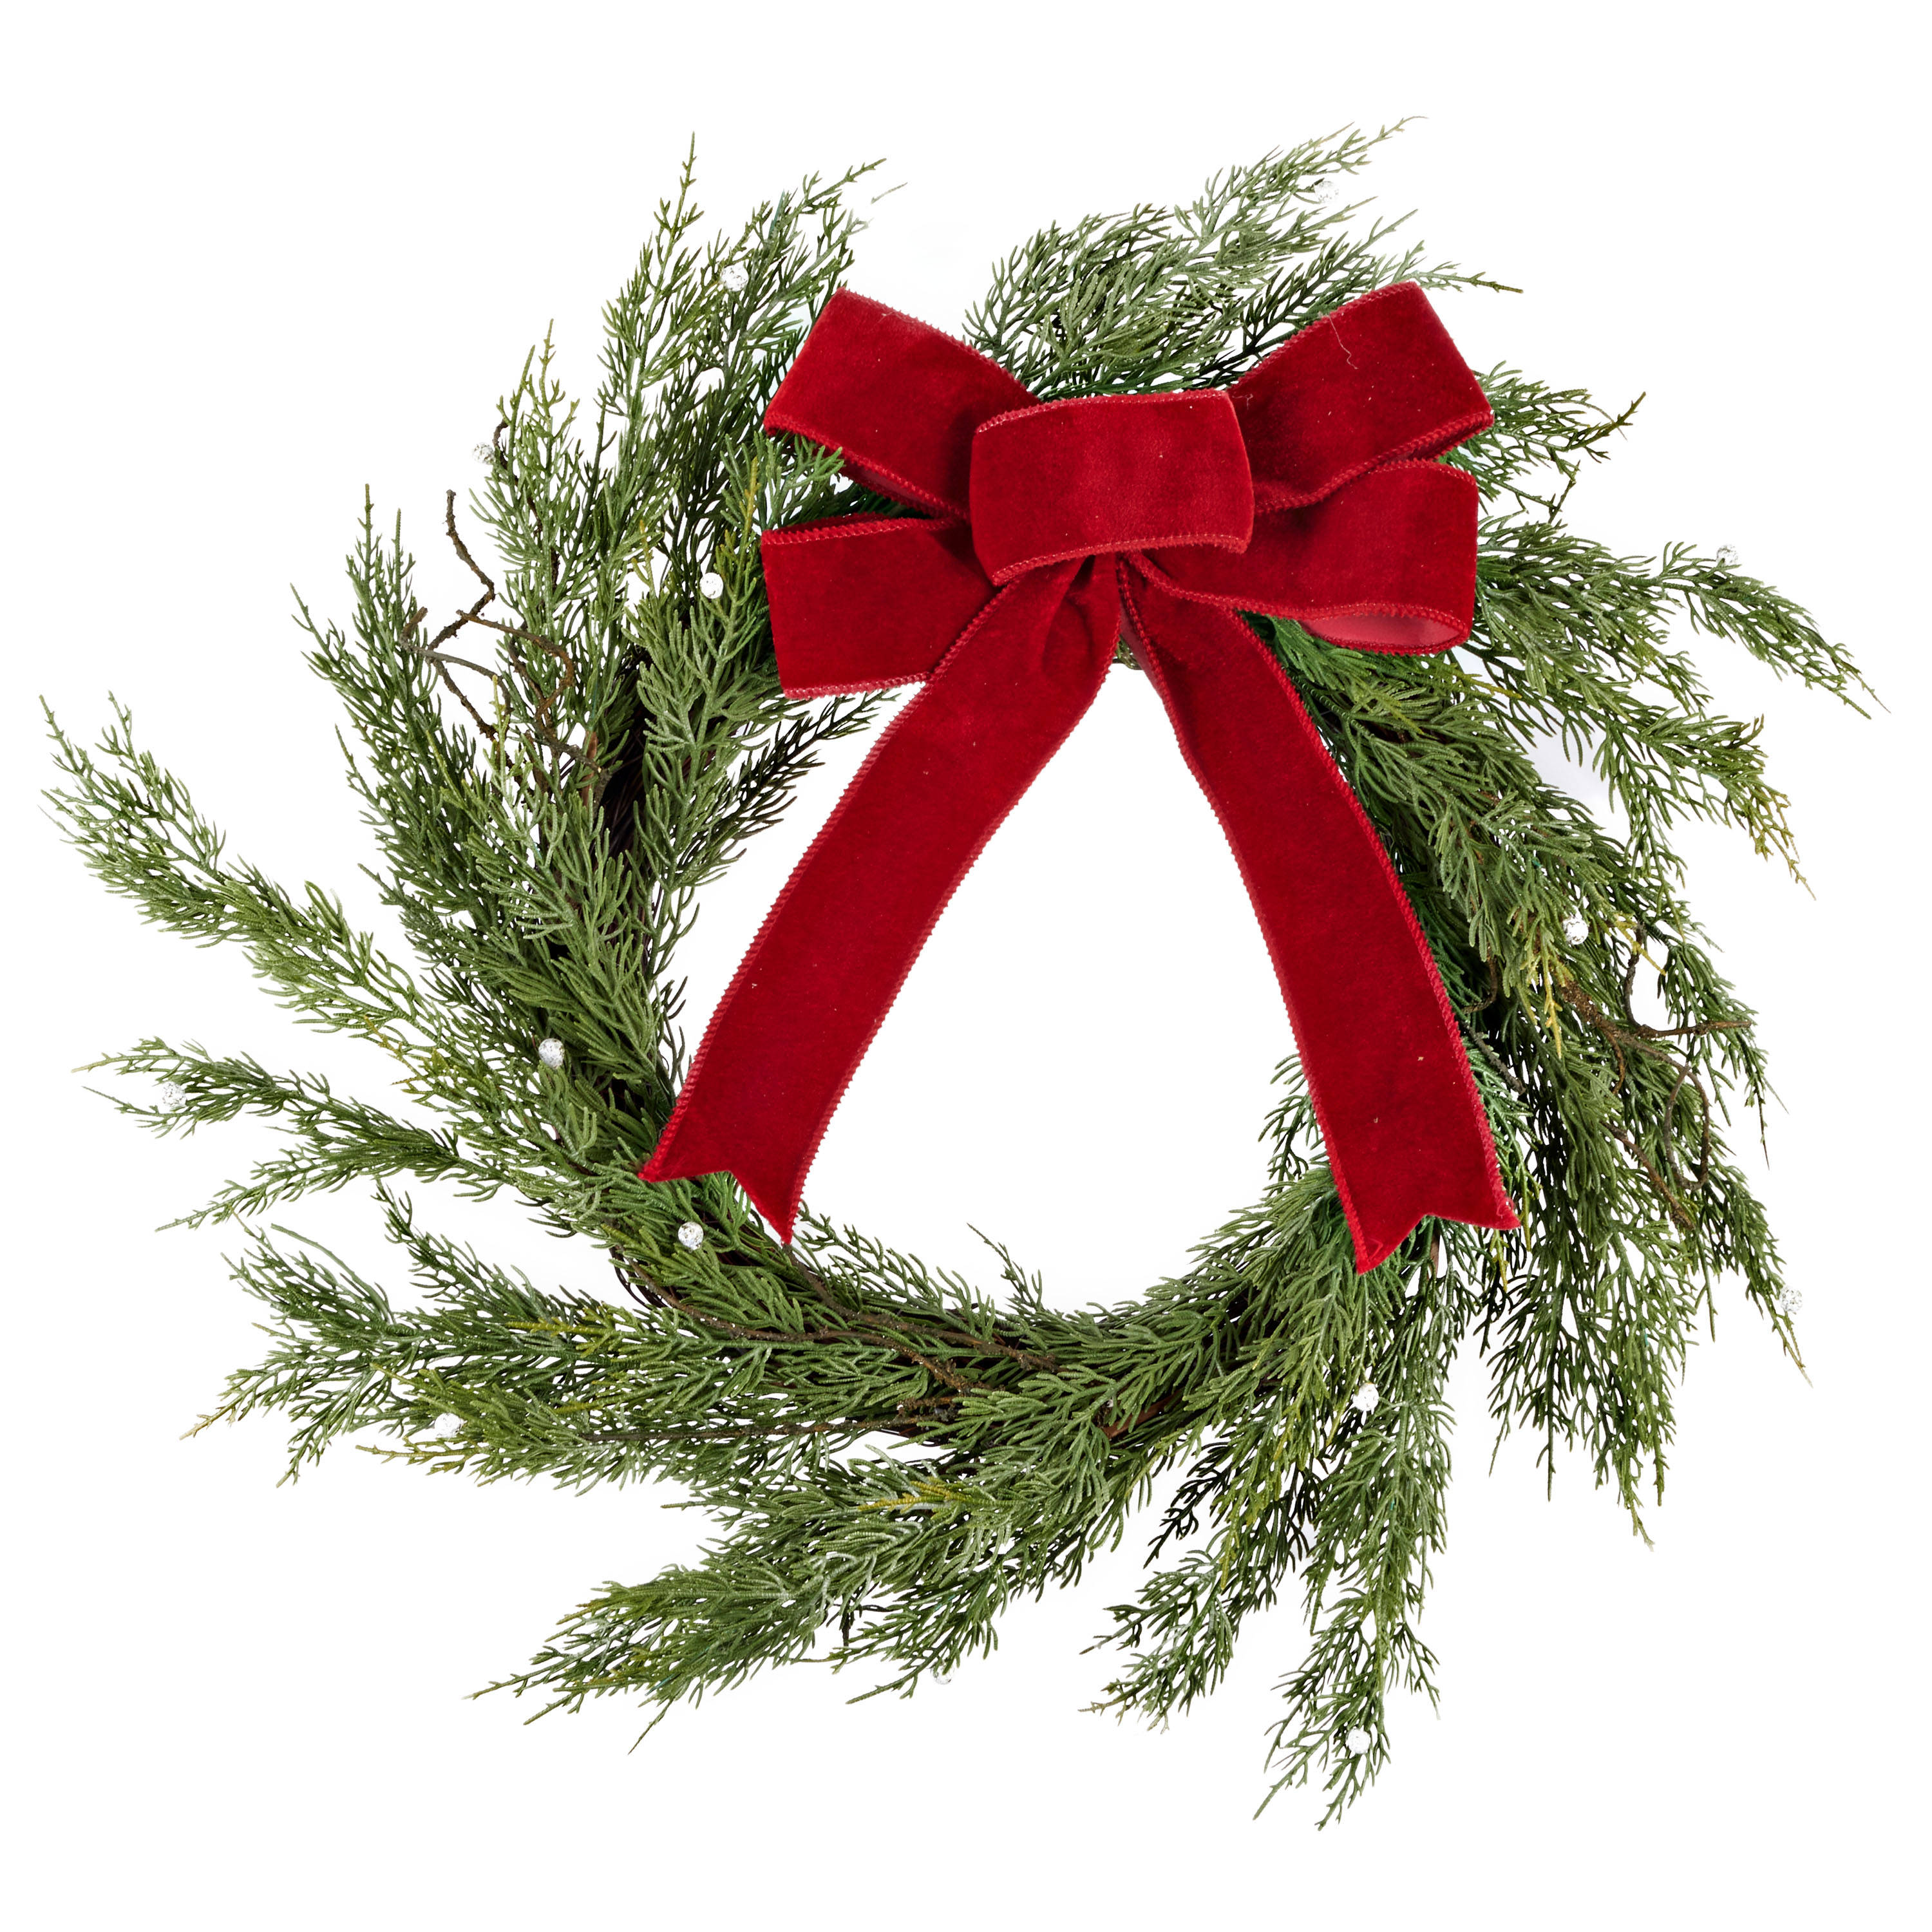 Holiday Time Christmas Red Bow Wreath, 20 inch diameter - image 1 of 2